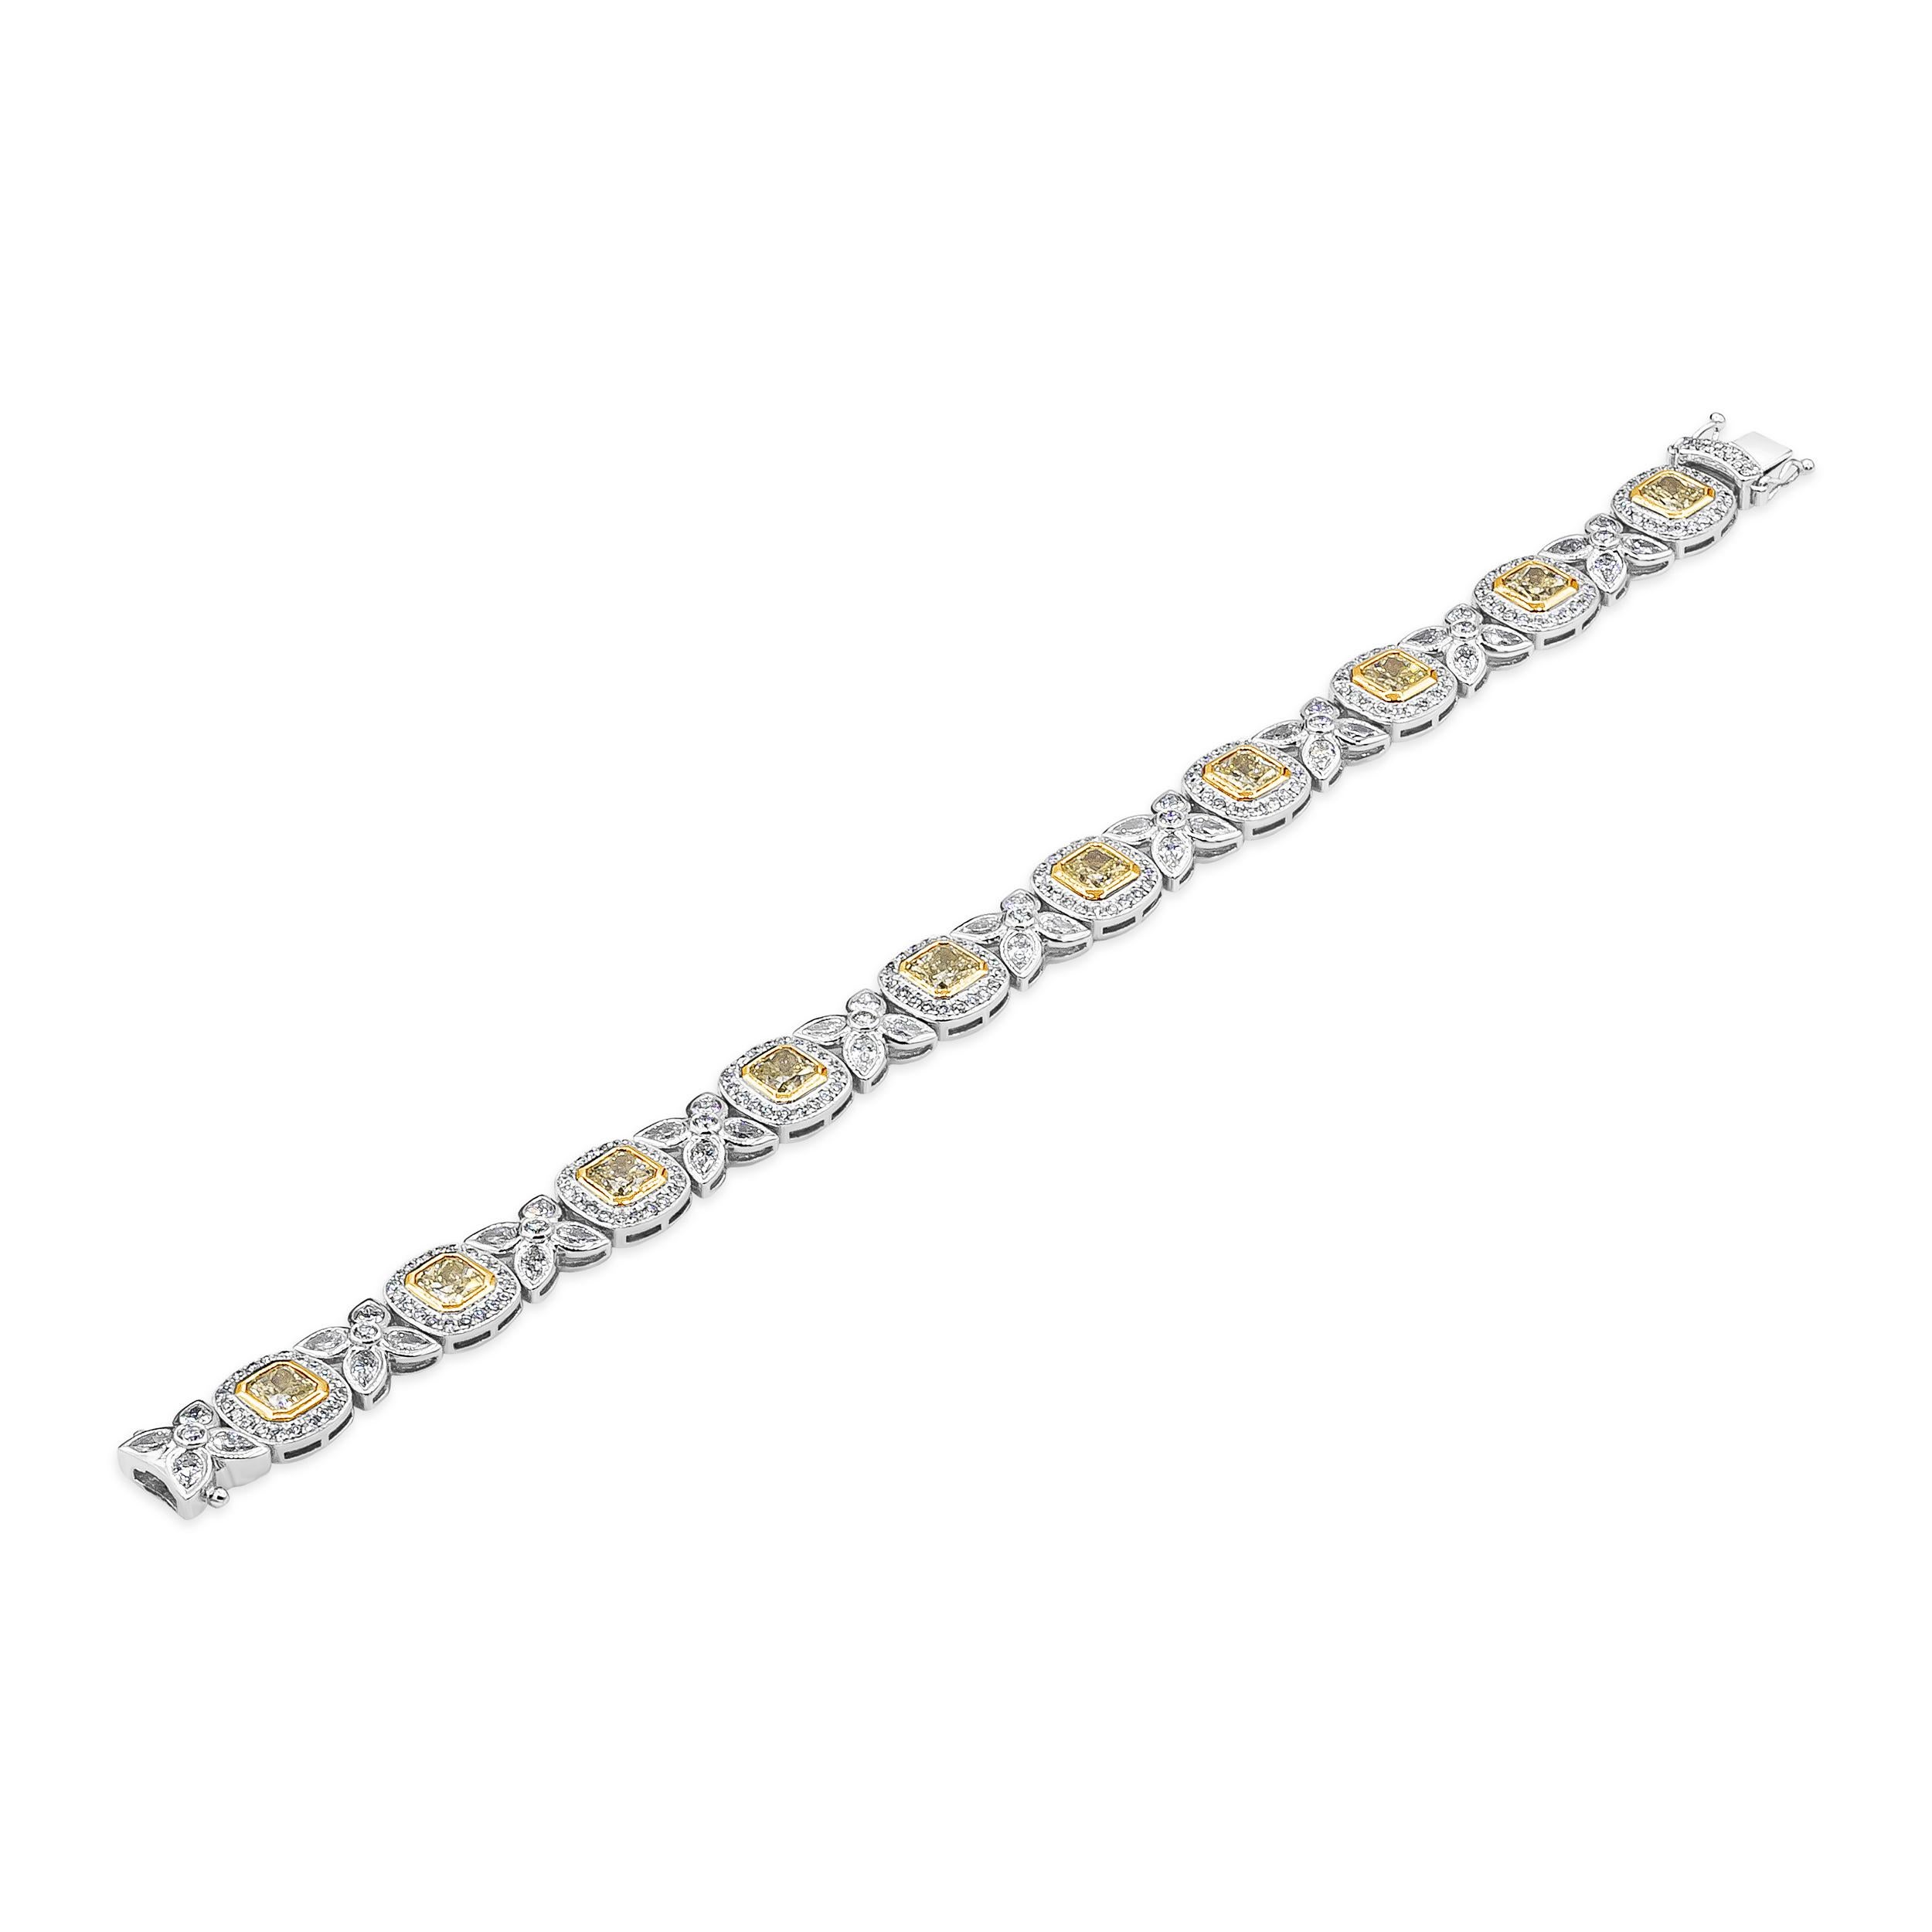 A unique piece of jewelry handcrafted in New York City. Showcasing yellow radiant cut diamonds weighing 5.98 carats total, set in a brilliant diamond halo. Each diamond halo is spaced by marquise cut diamonds arranged in in a beautiful floral motif.